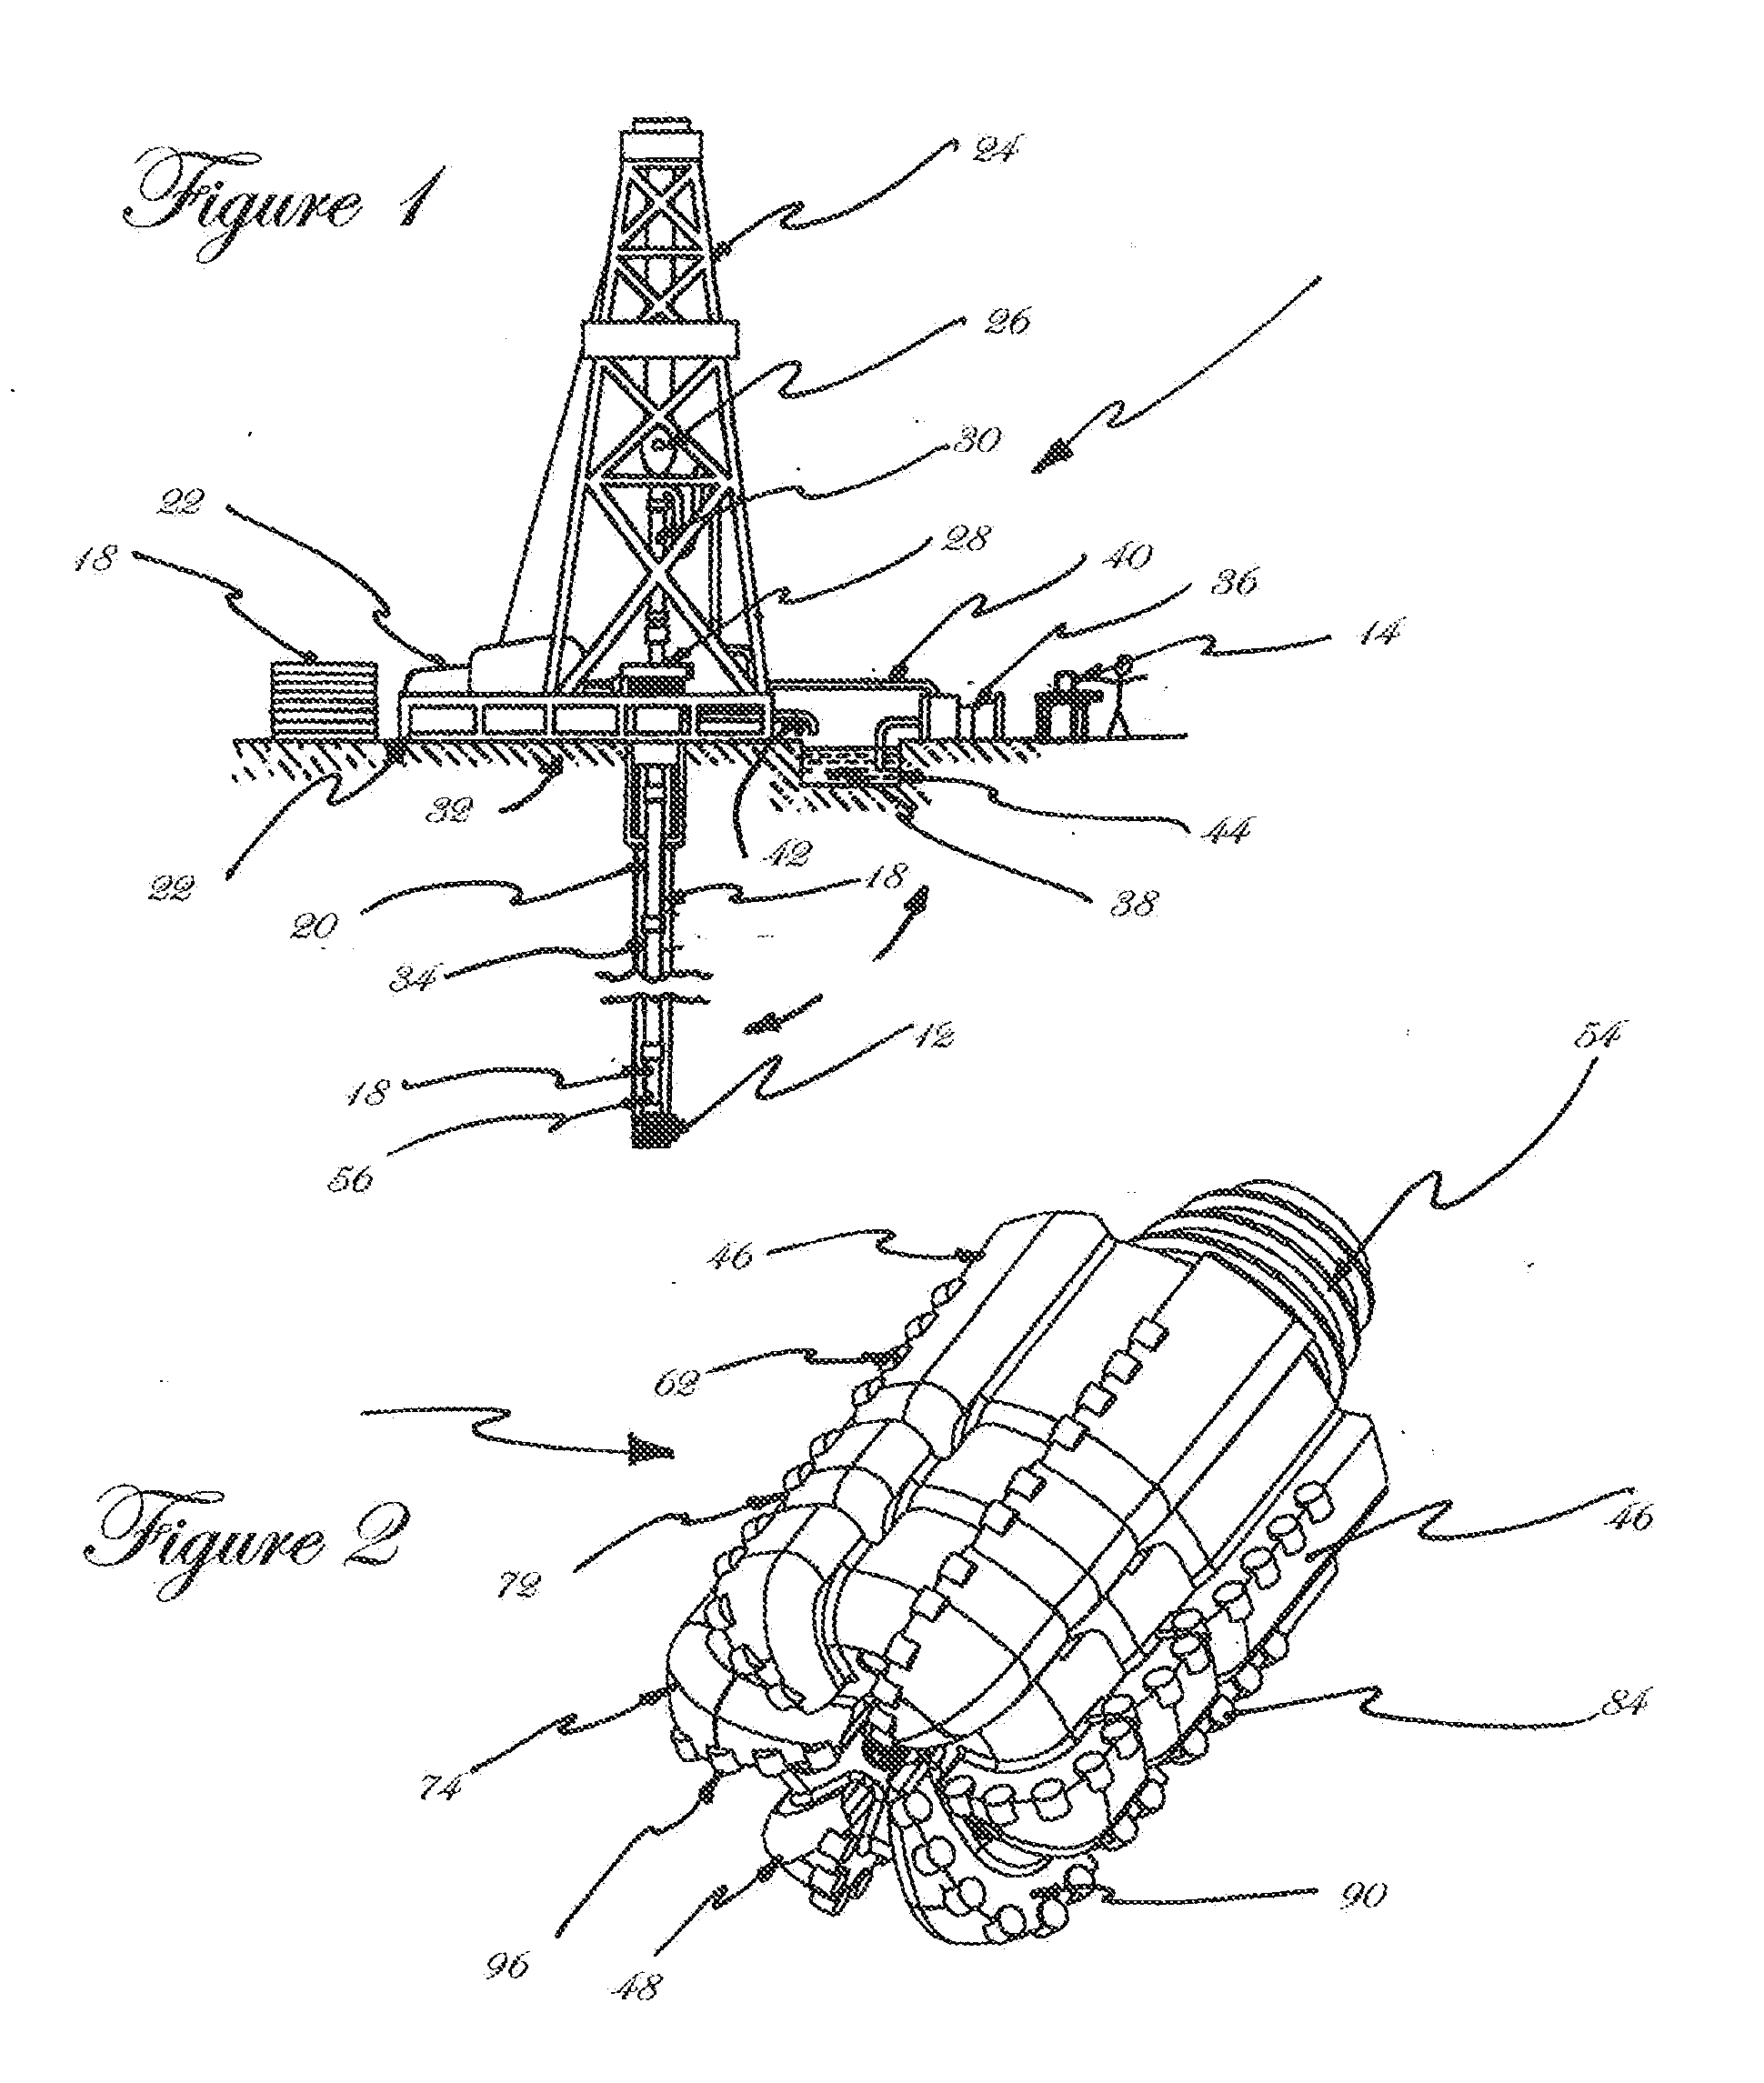 Drilling device and process